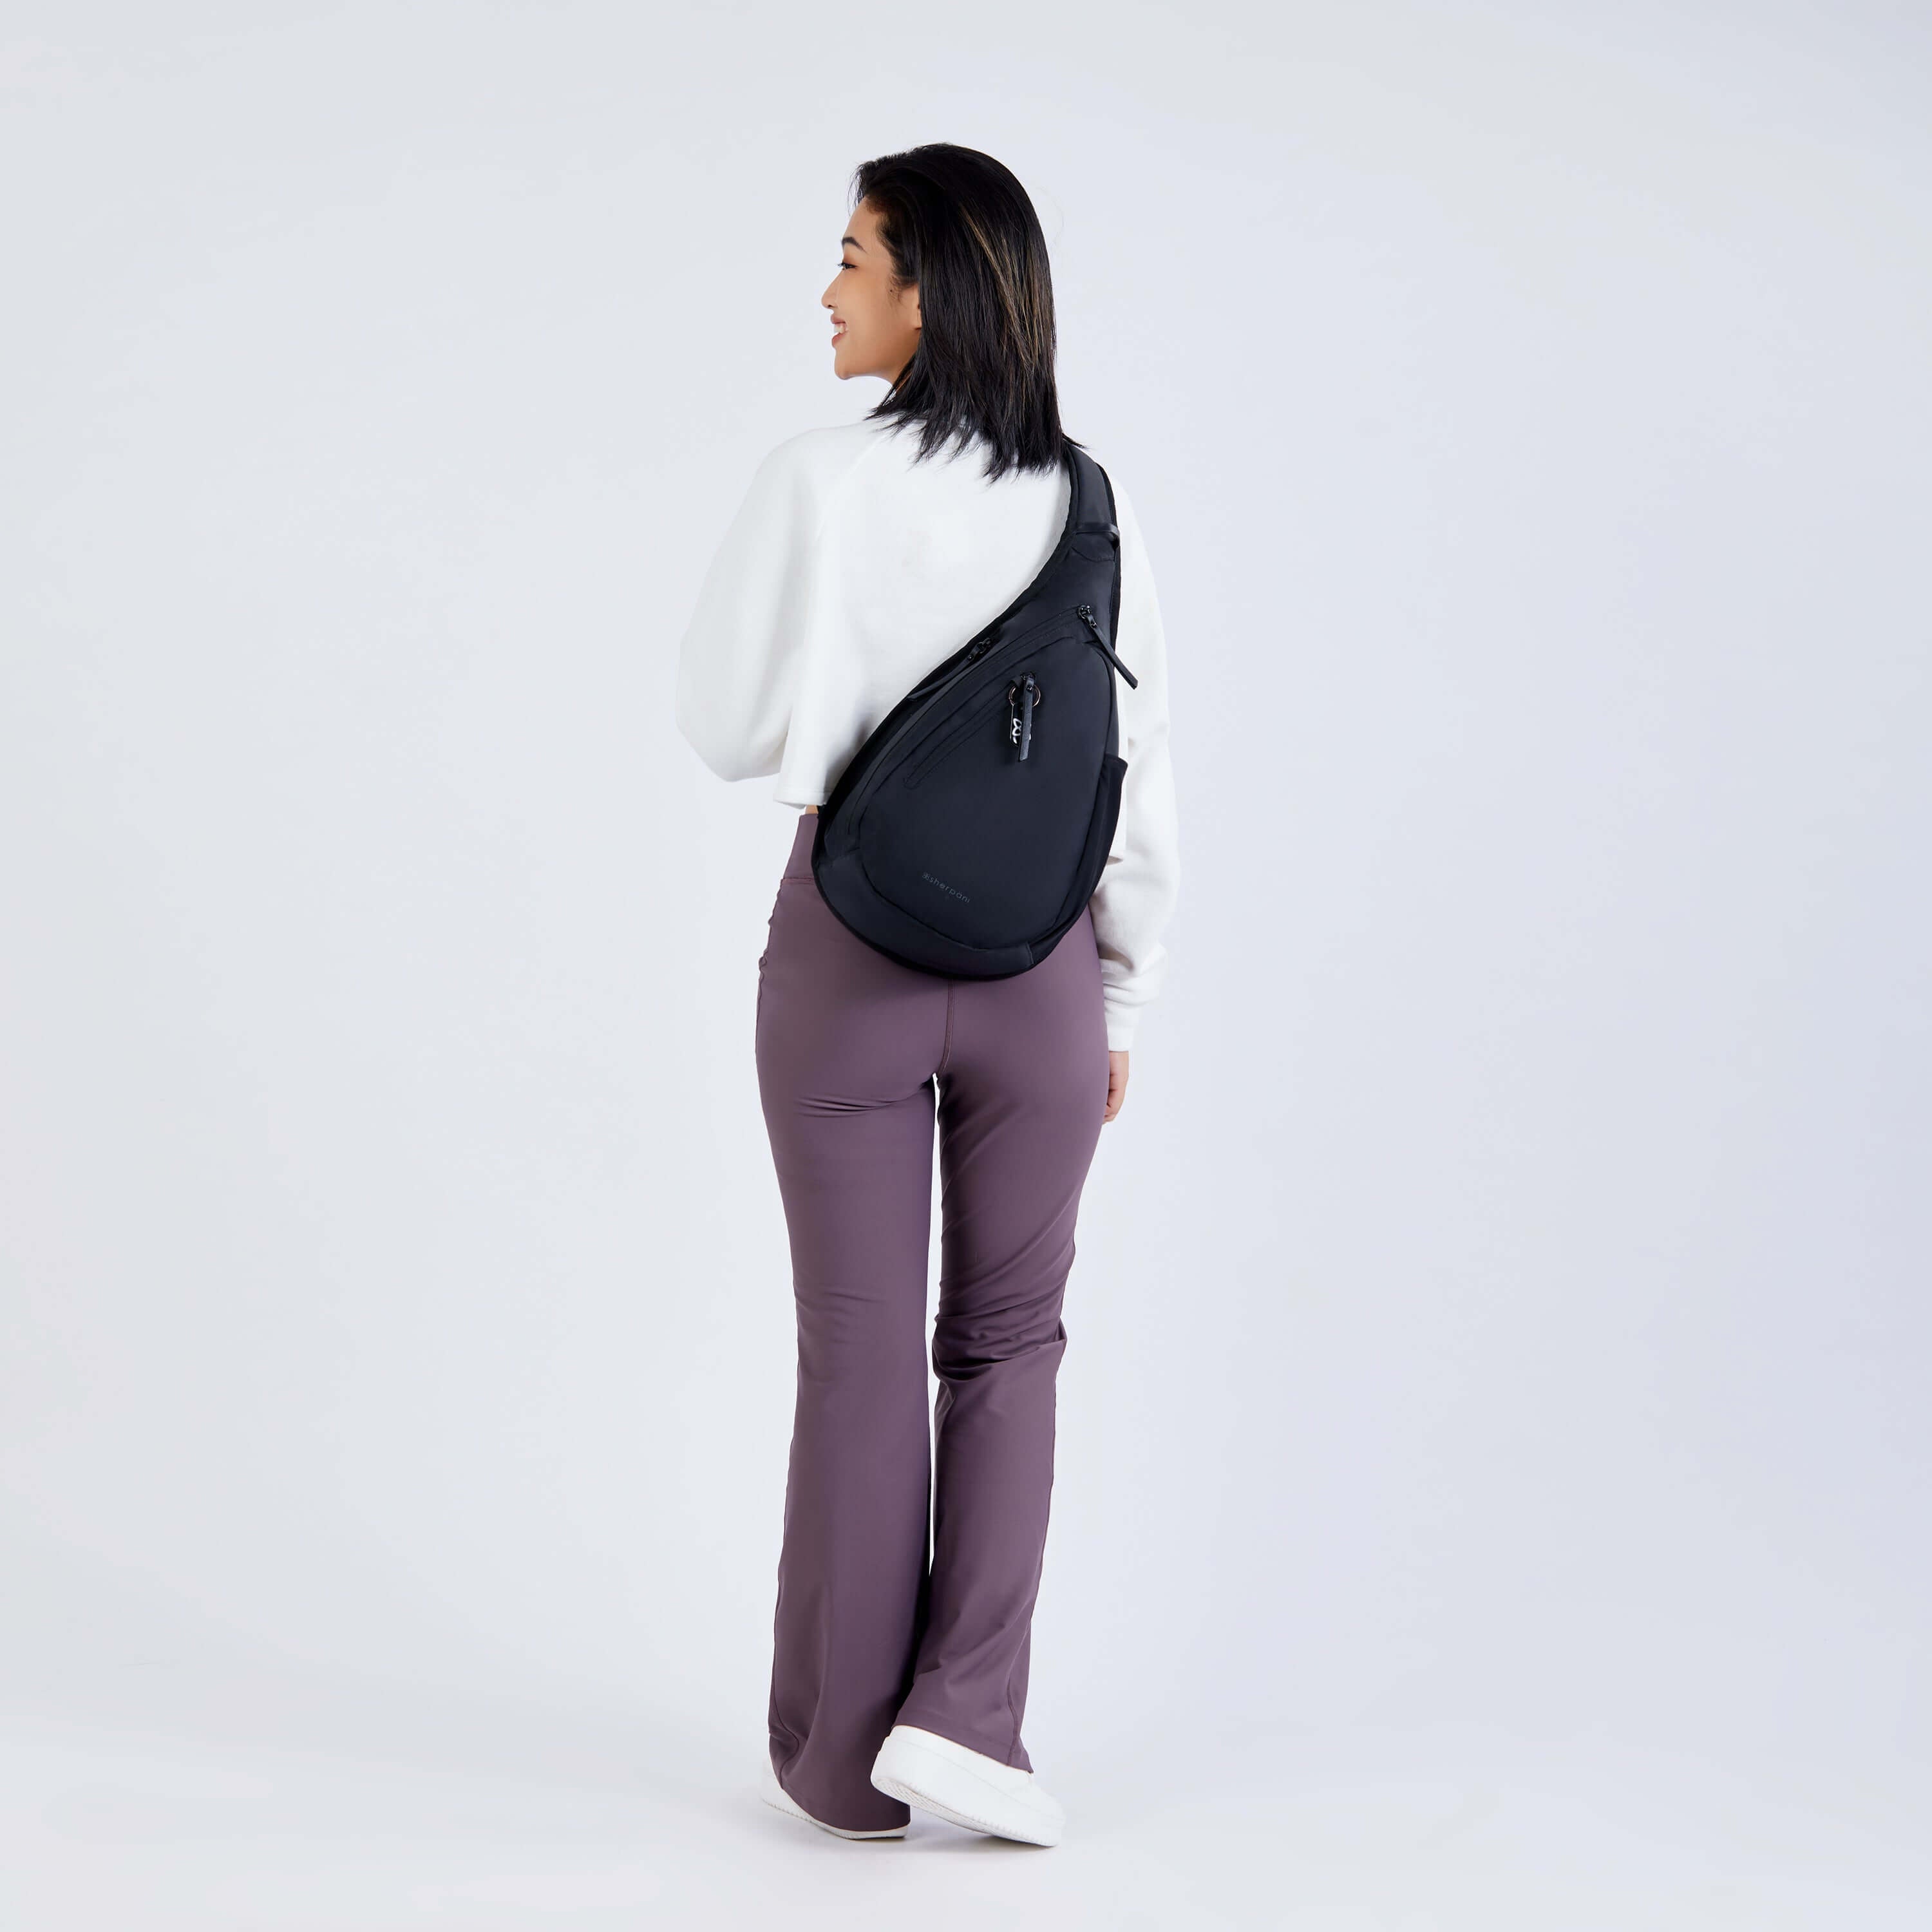 Full body view of a dark haired model facing away from the camera and smiling over her left shoulder. She is wearing a white sweatshirt, purple leggings and Sherpani’s Anti-Theft bag, the Esprit AT in Carbon, across her back.